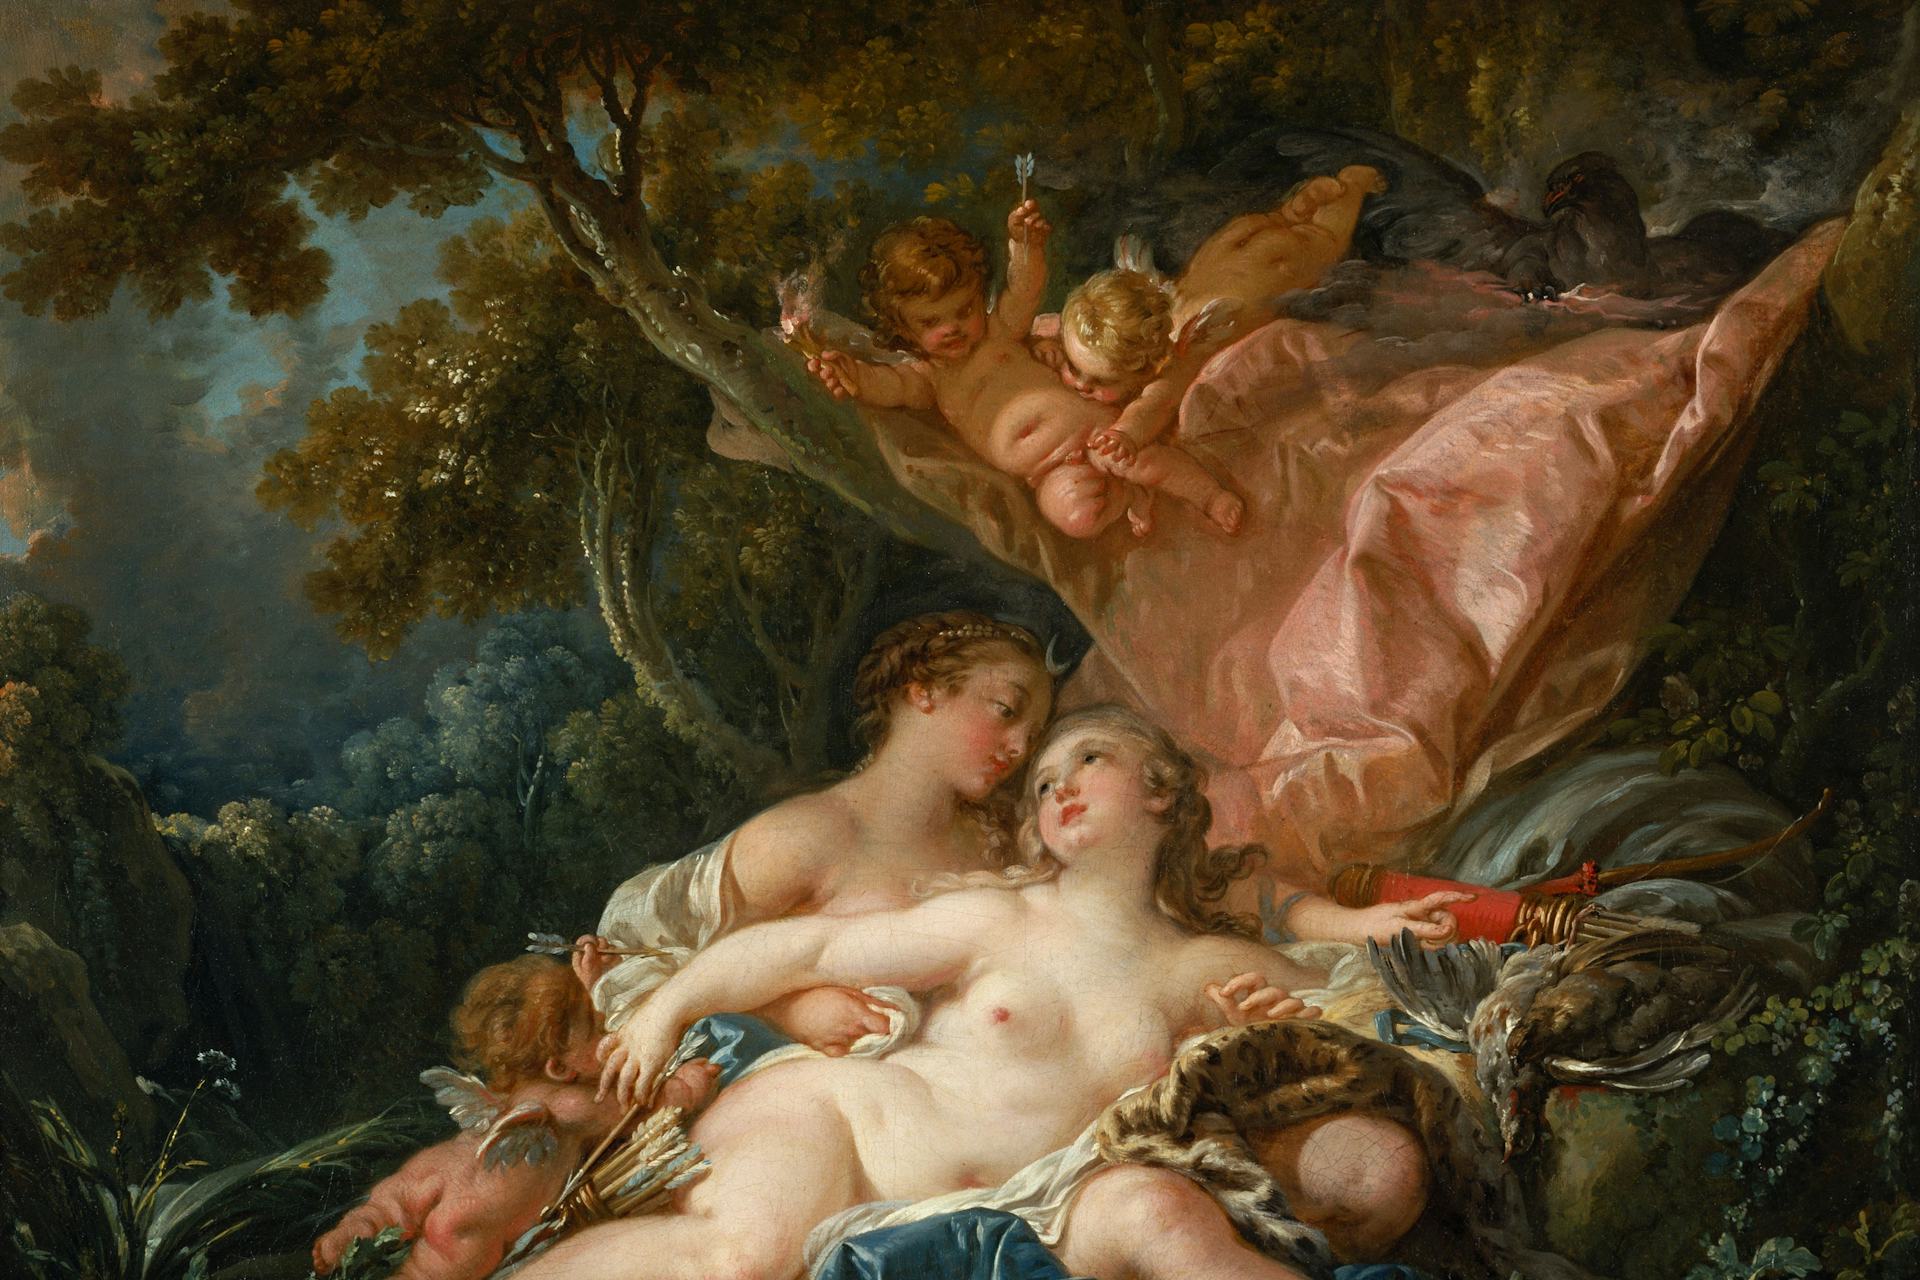 The Nymph Callisto Seduced by Jupiter in the Guise of Diana